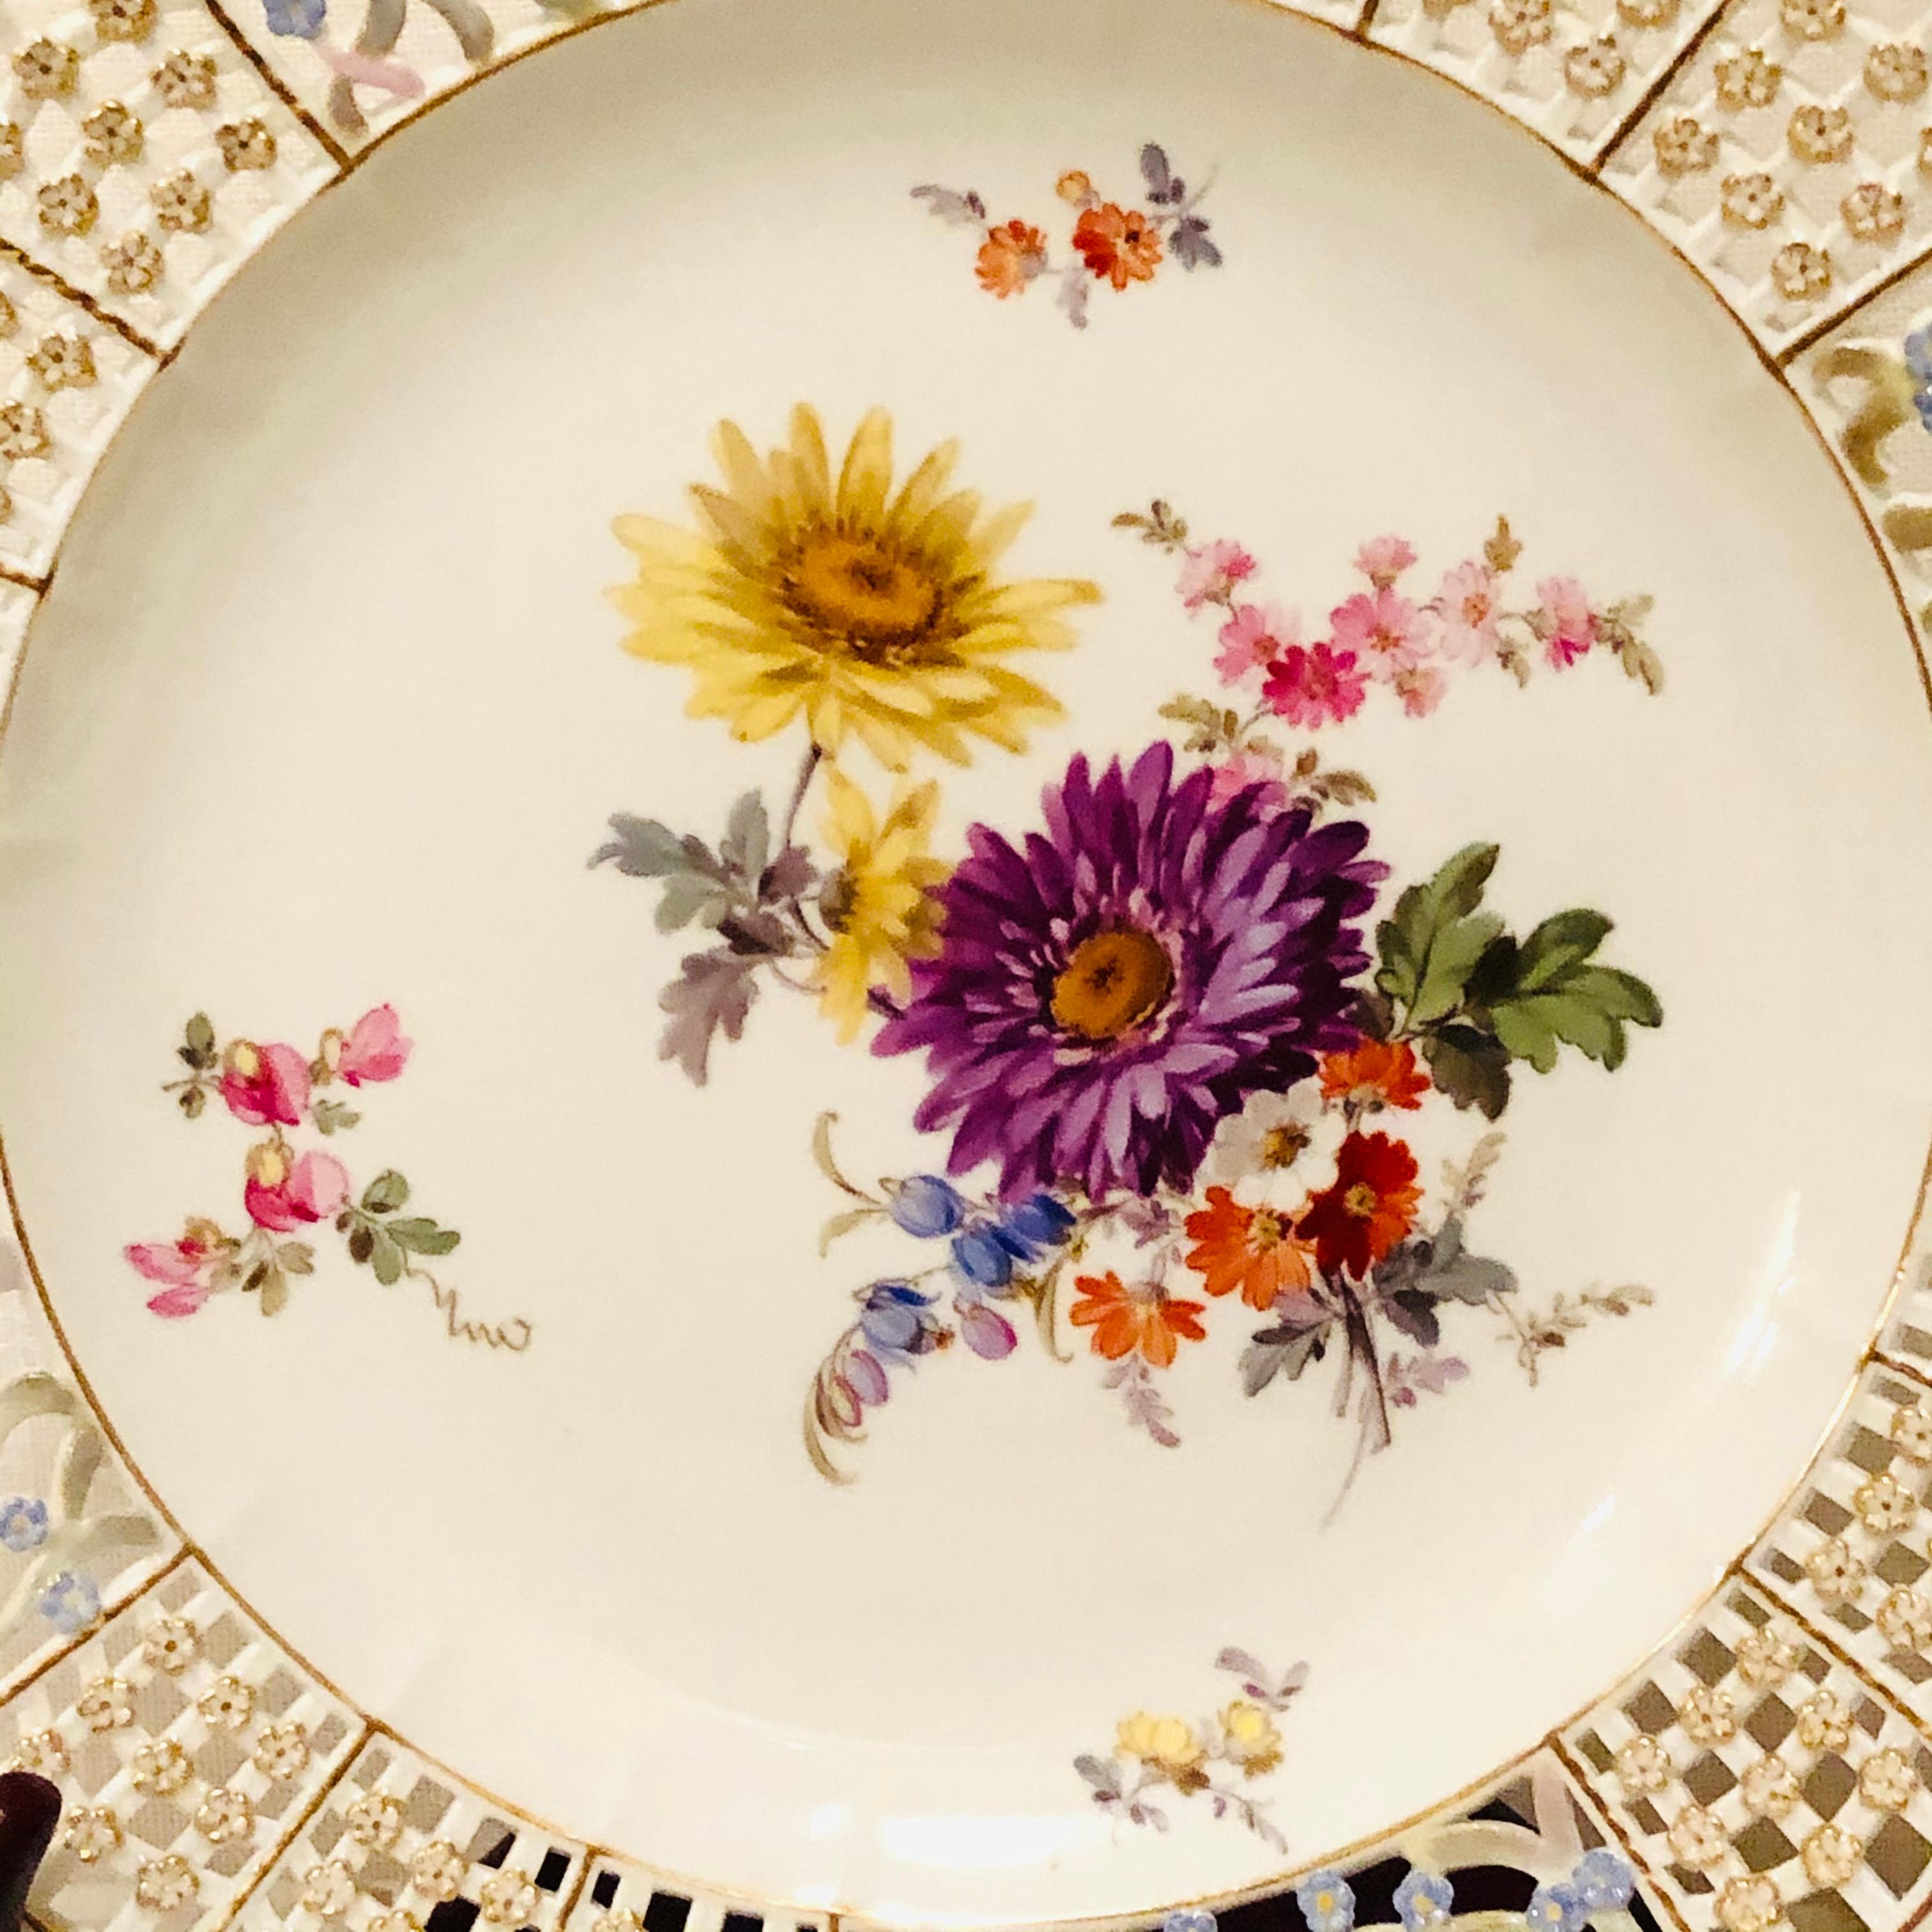 This is an exquisite Meissen cabinet plate painted with a large beautiful flower bouquet. The Meissen plate has a very intricate reticulated or open work border profusely decorated with raised gold and blue forget me nots. This Meissen plate is from